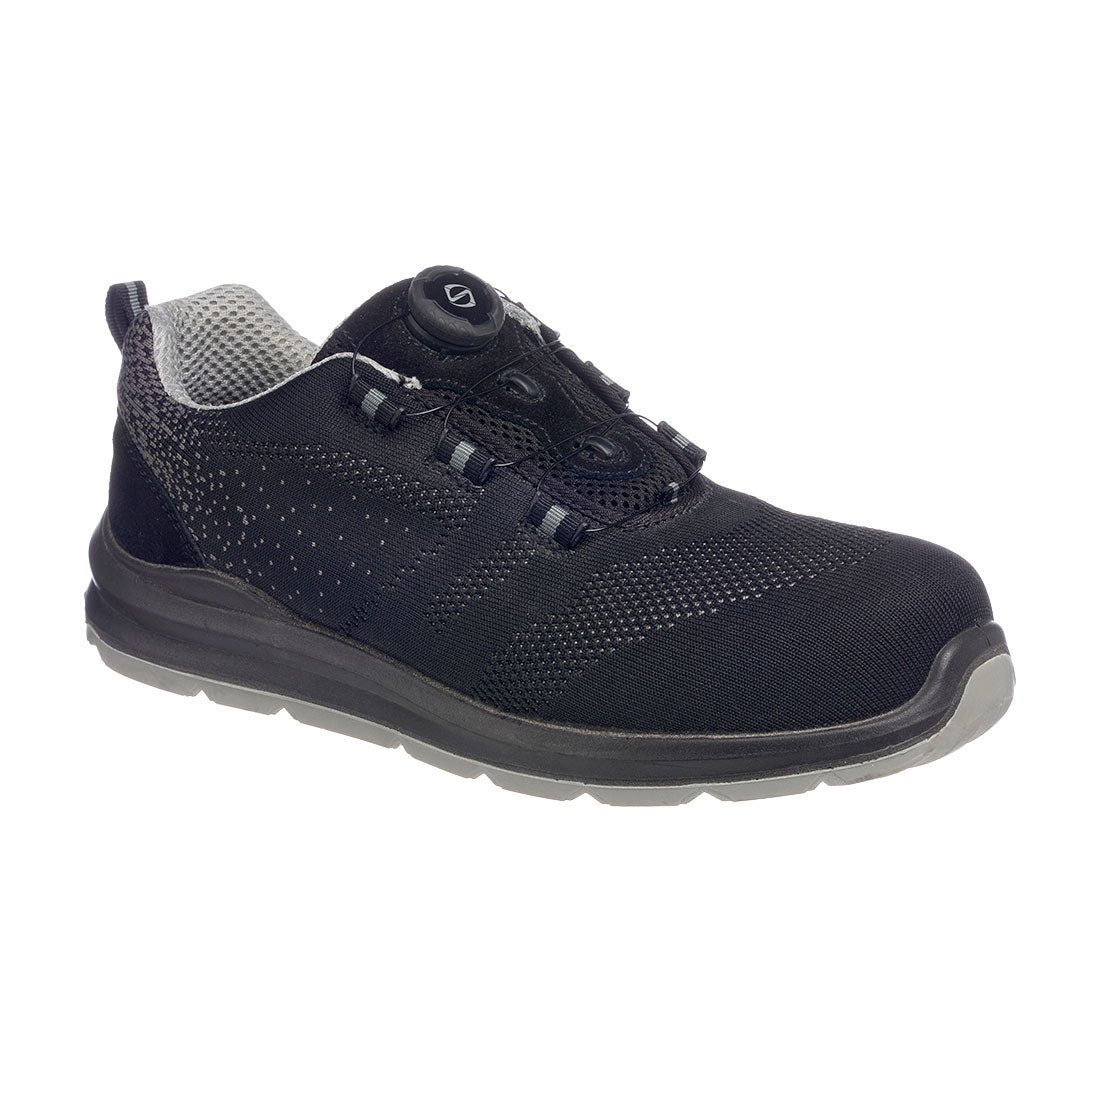 Compositelite Wire Lace Safety Trainer- FT08 Black/Grey